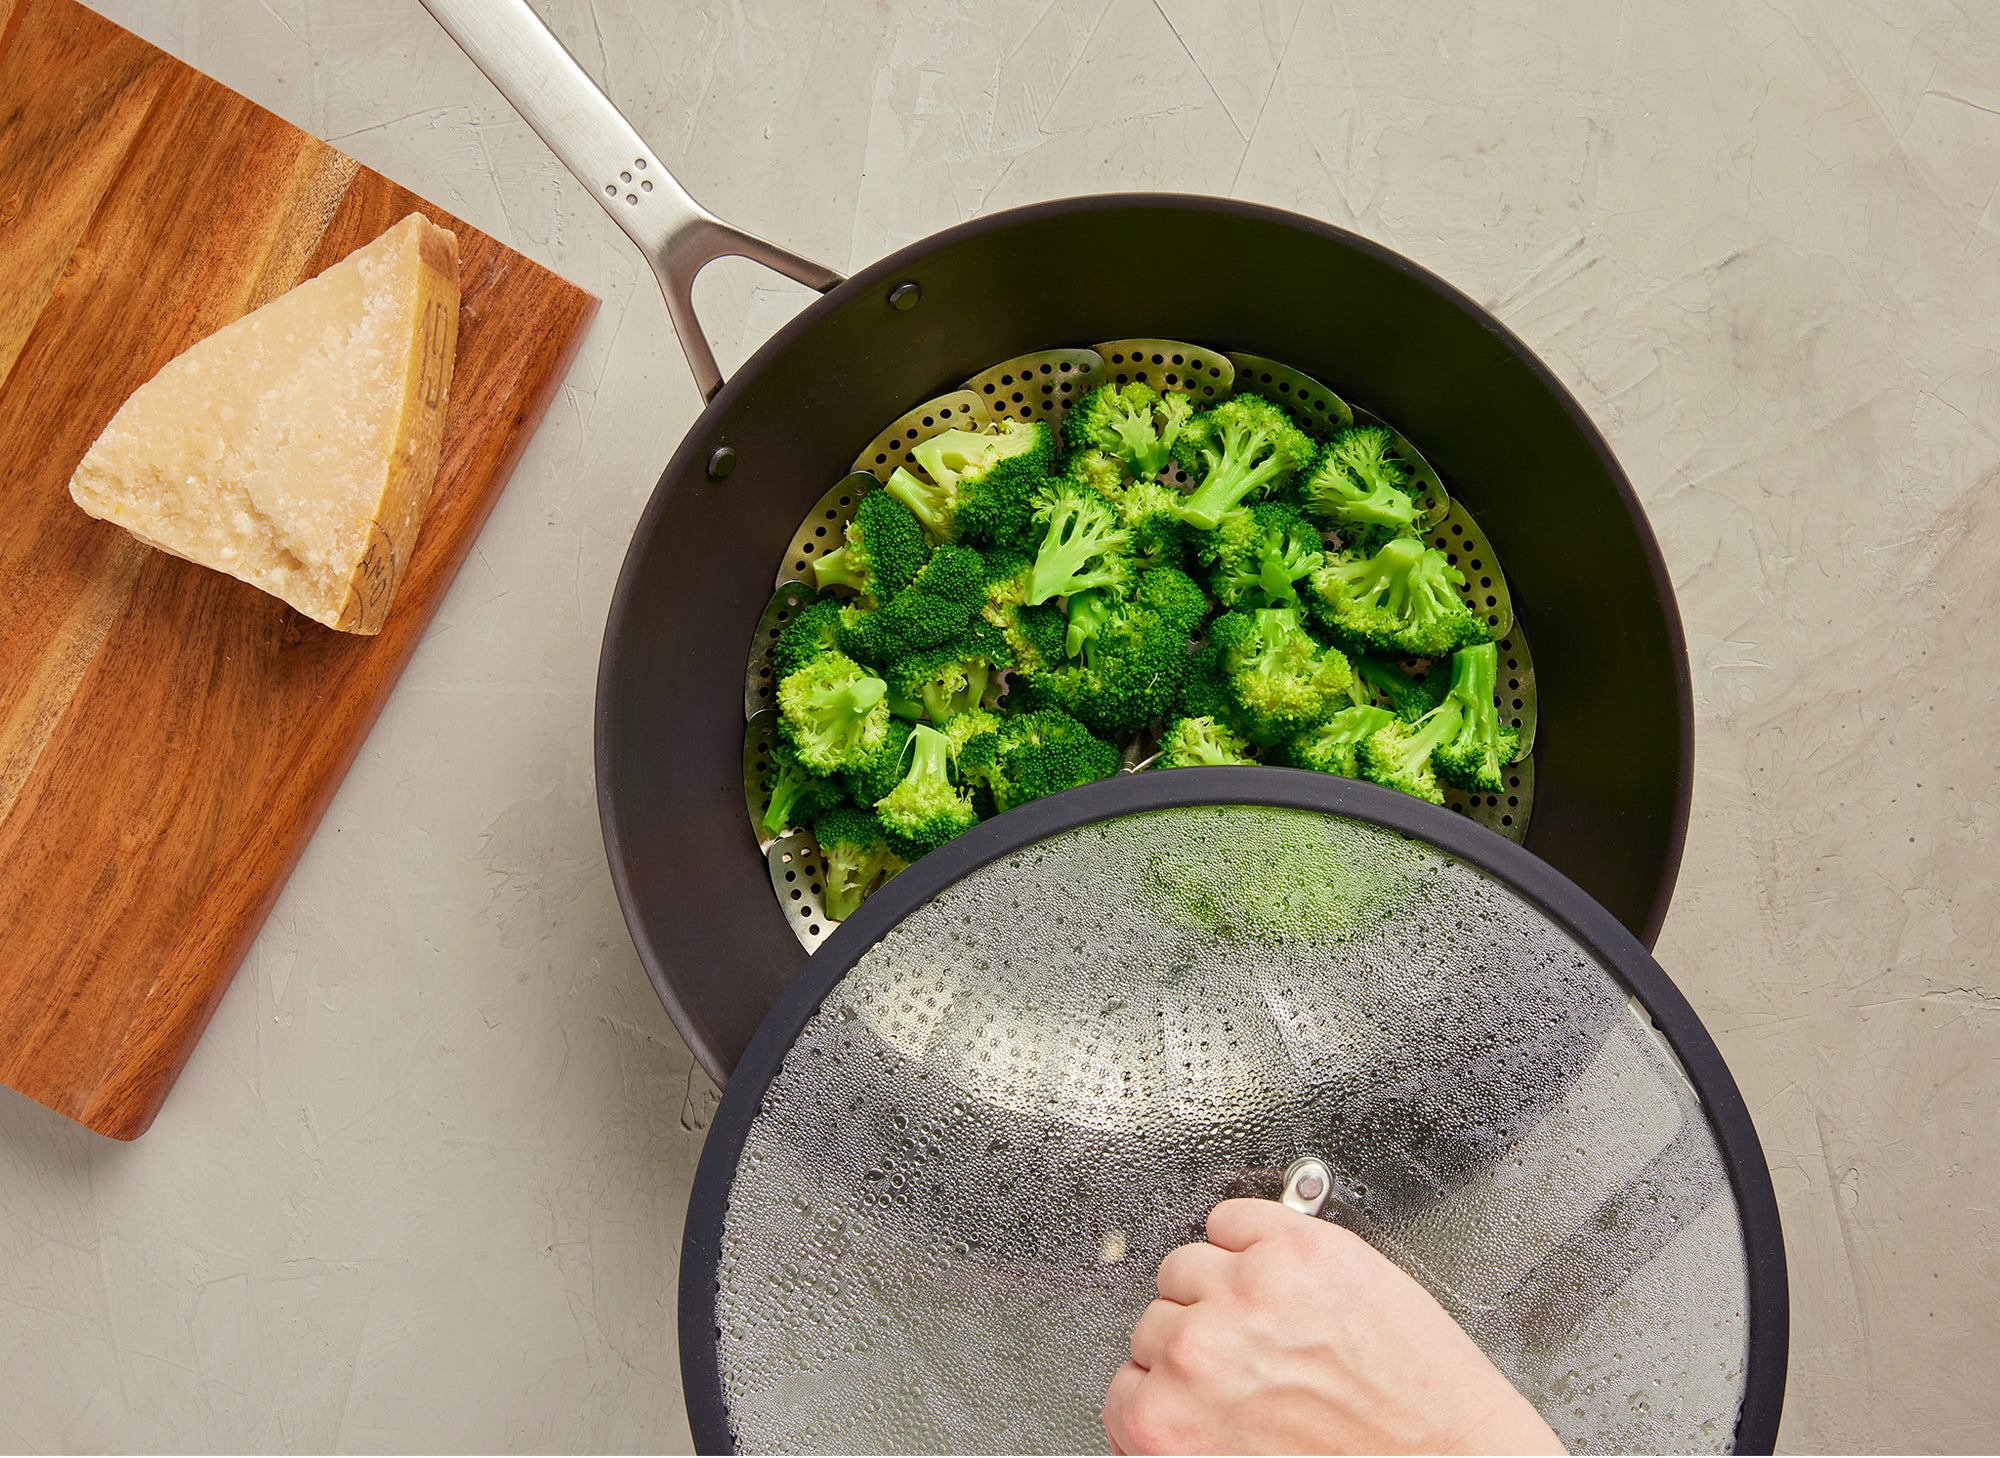 {{12-inch}} A bird’s eye view of the Misen Carbon Steel Wok being used to steam broccoli, which sits in the wok in a metal colander. A chef’s hand removes a steamy lid from the wok. A cutting board with a wedge of cheese can be seen next to the wok.